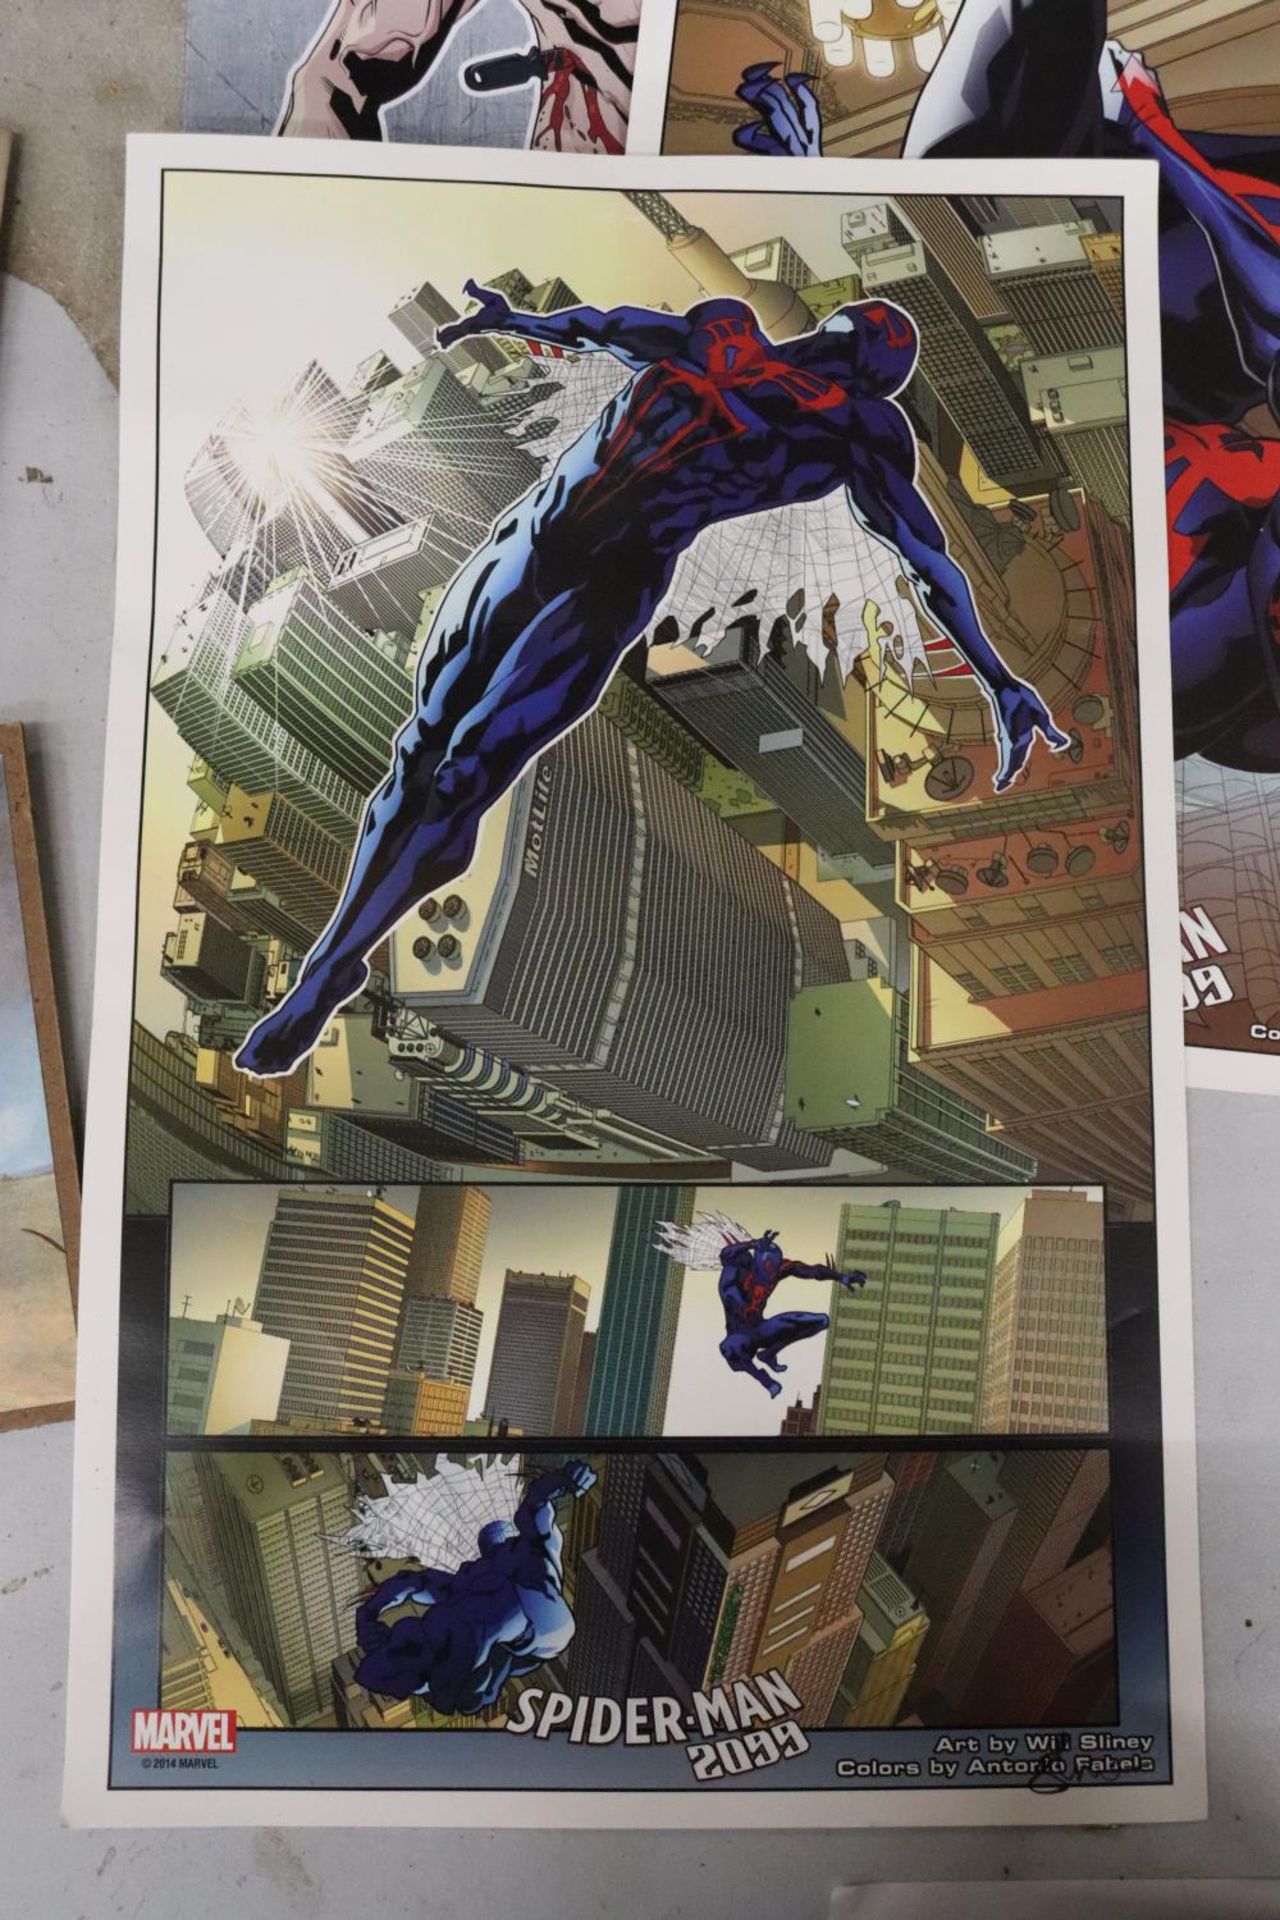 A QUANTITY OF SUPERHERO RELATED POSTERS, MAGAZINES PLUS A MIXED MEDIA PICTURE OF SPIDERMAN WITH - Image 4 of 6